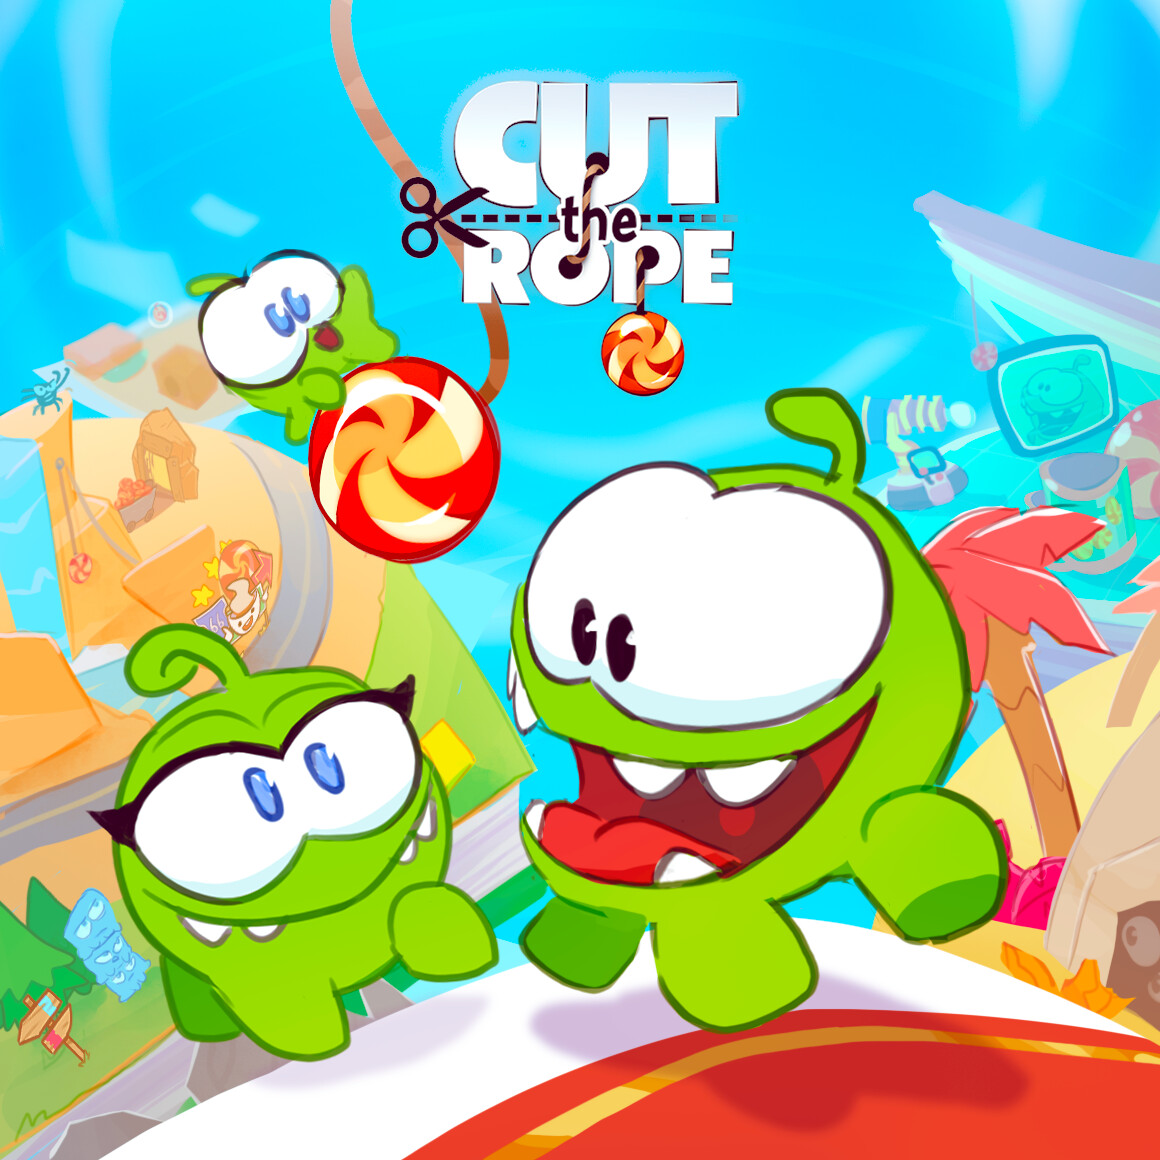 The Future, Cut the Rope Wiki